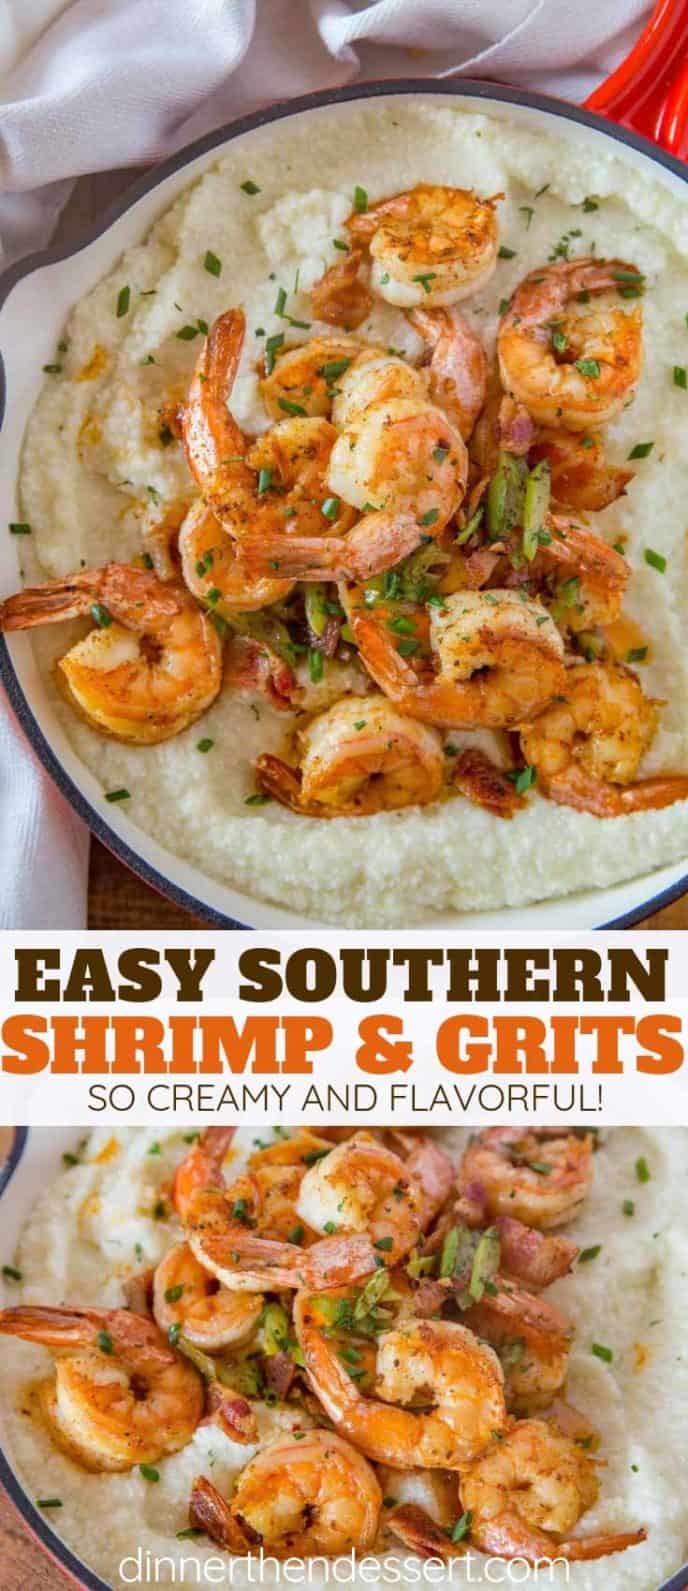 Easy Flavorful Shrimp and Grits